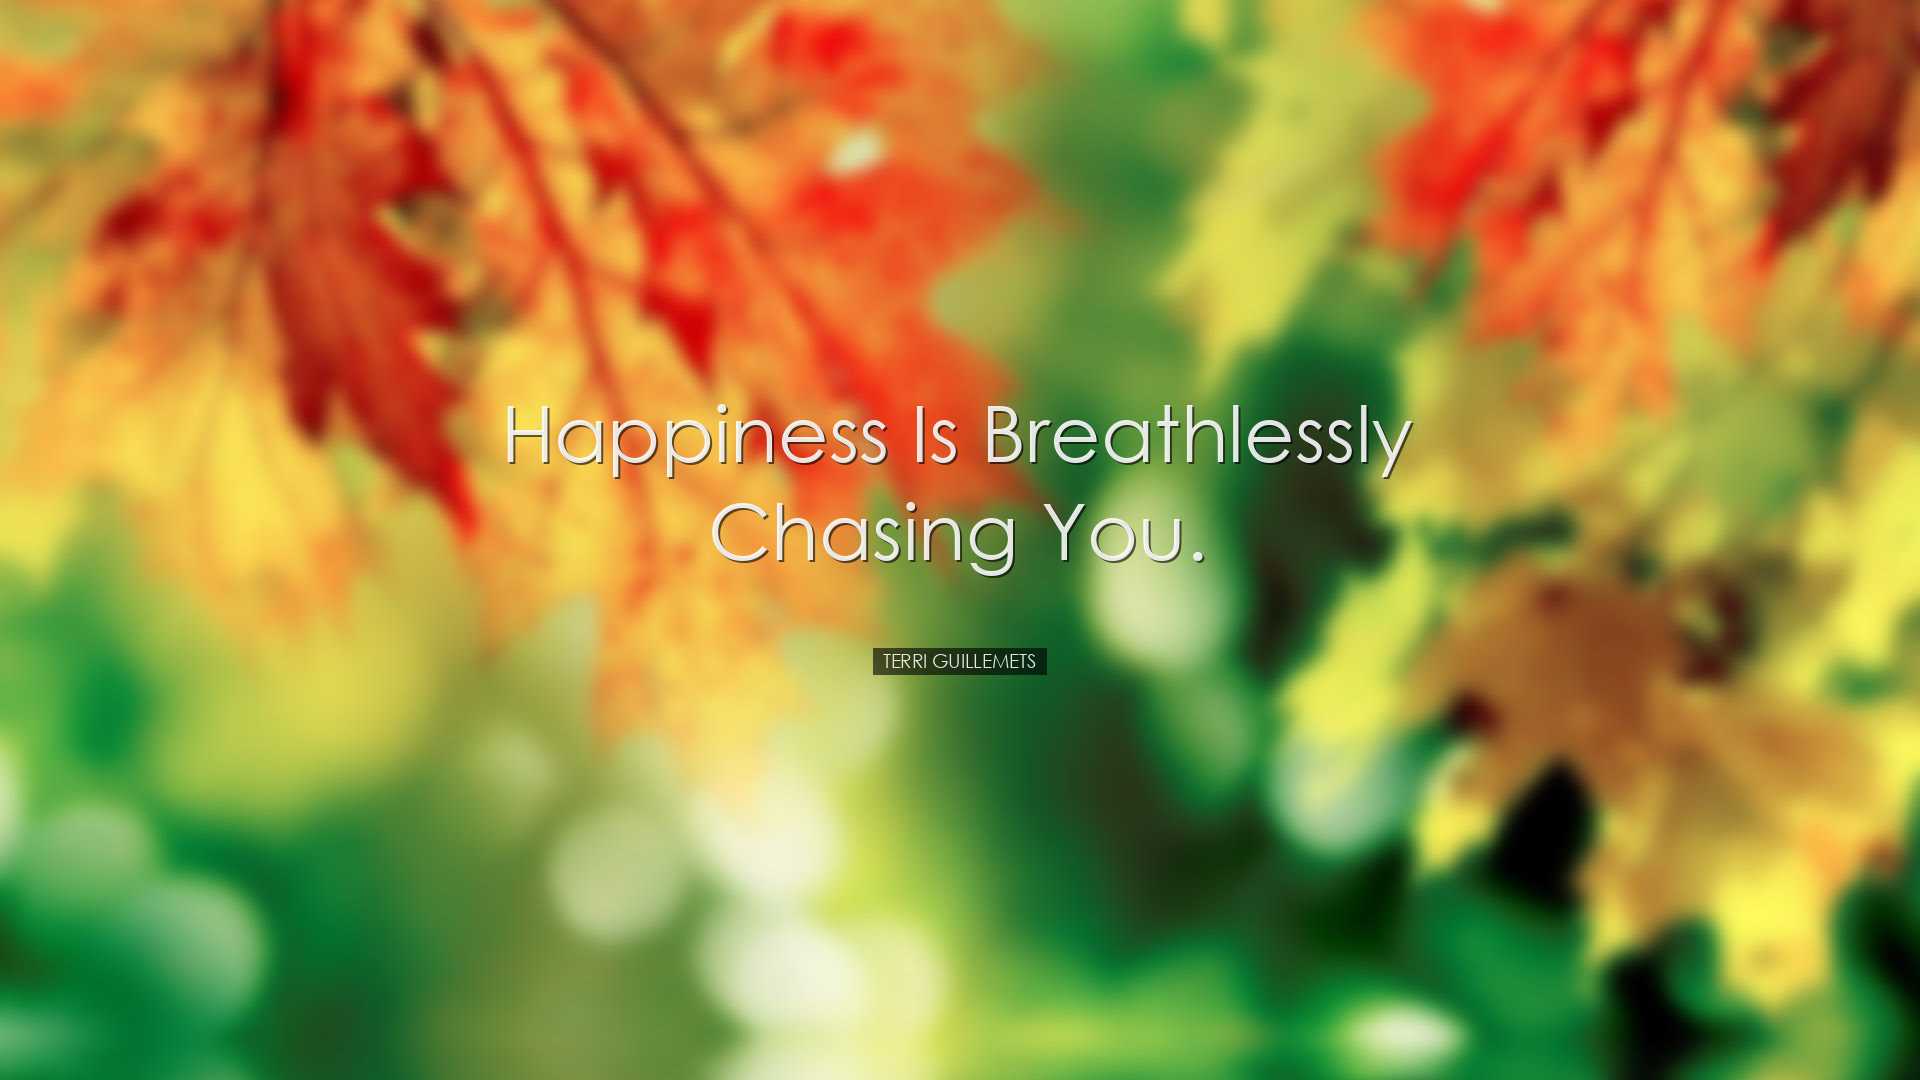 Happiness is breathlessly chasing you. - Terri Guillemets